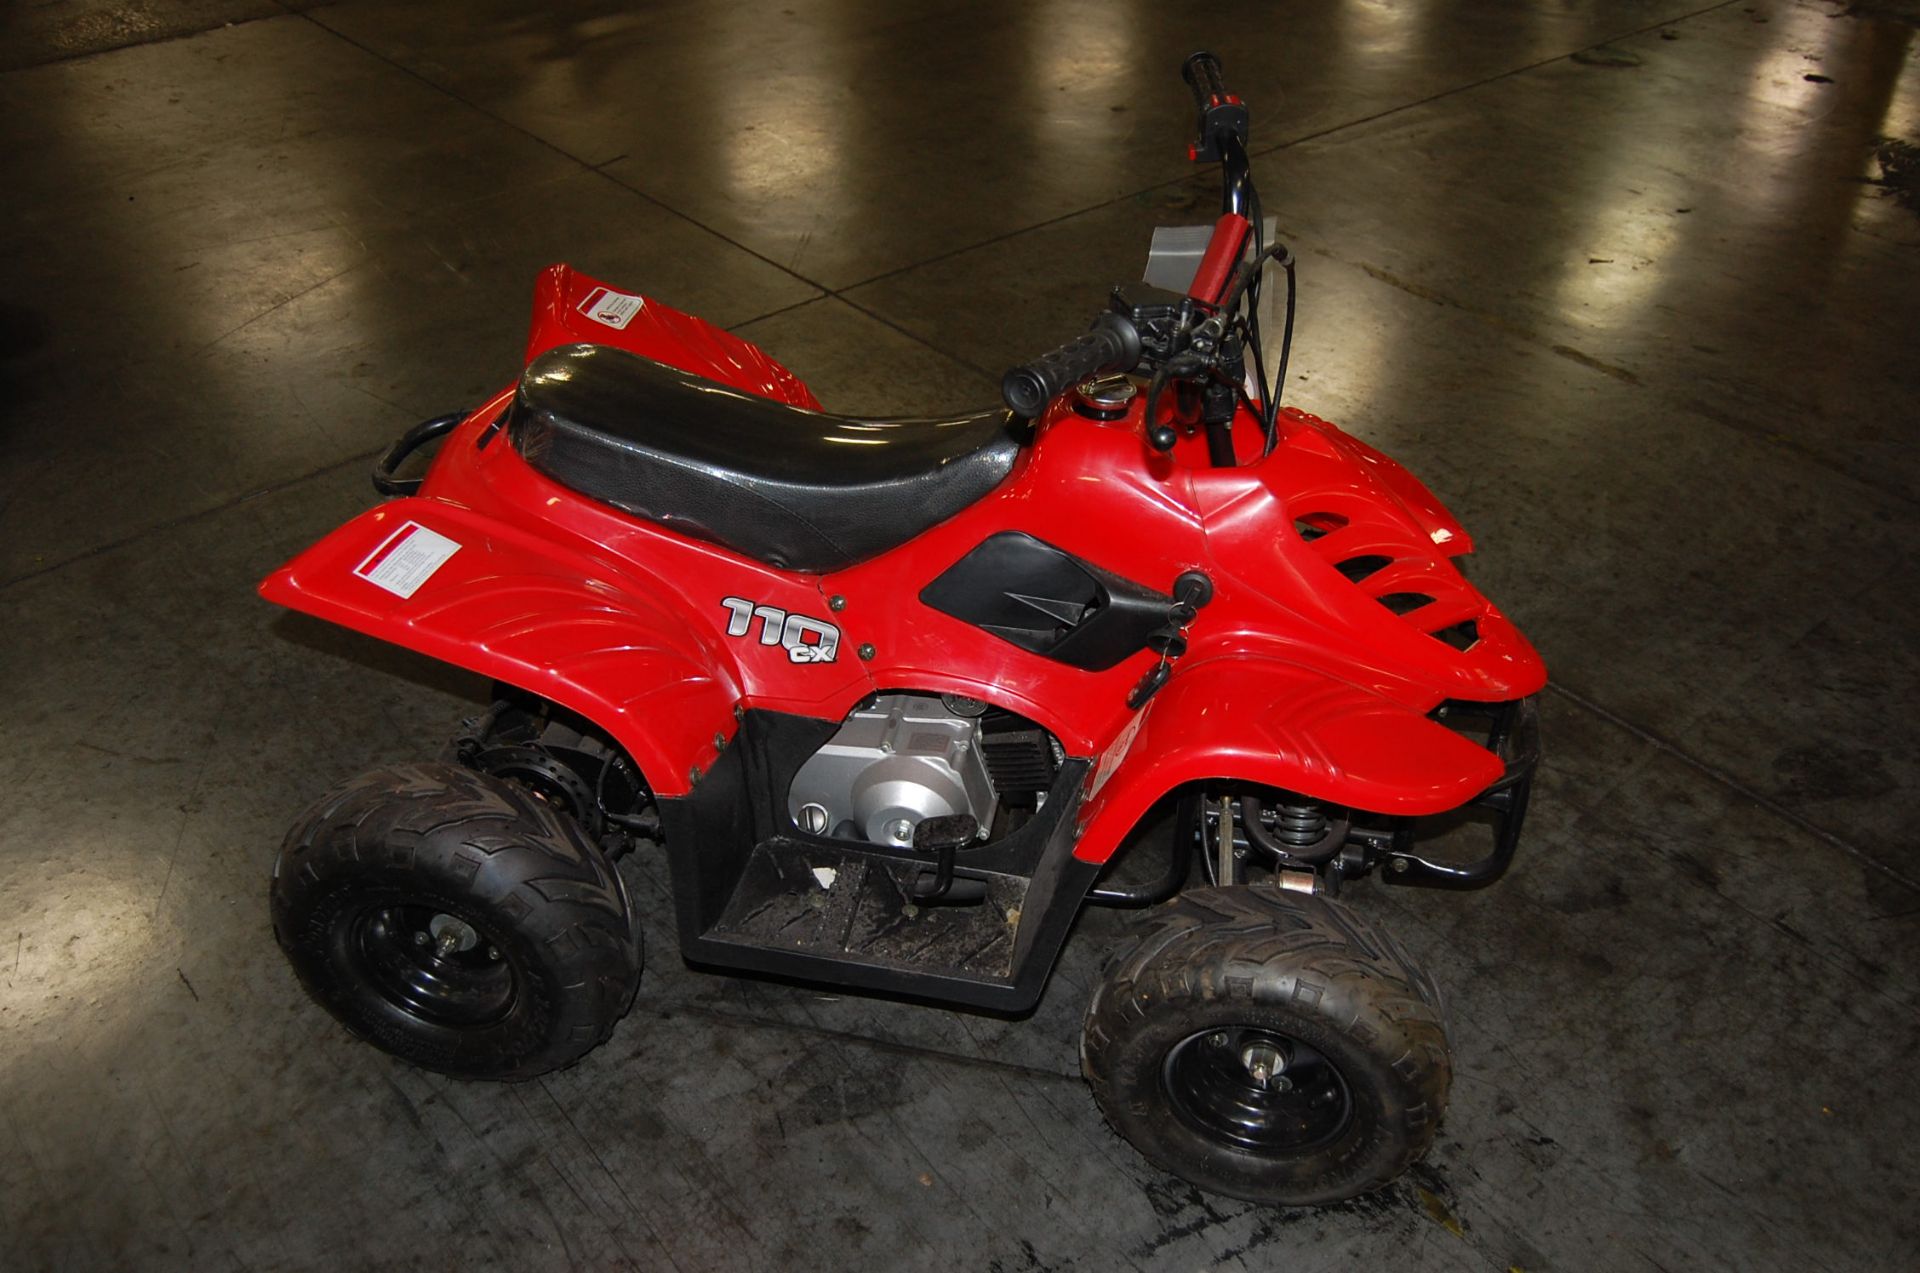 110CX ATV, NEW IN BOX, 110cc, Air cooled, 4 stroke, 1-cylinder automatic, electric start, chain - Image 2 of 2